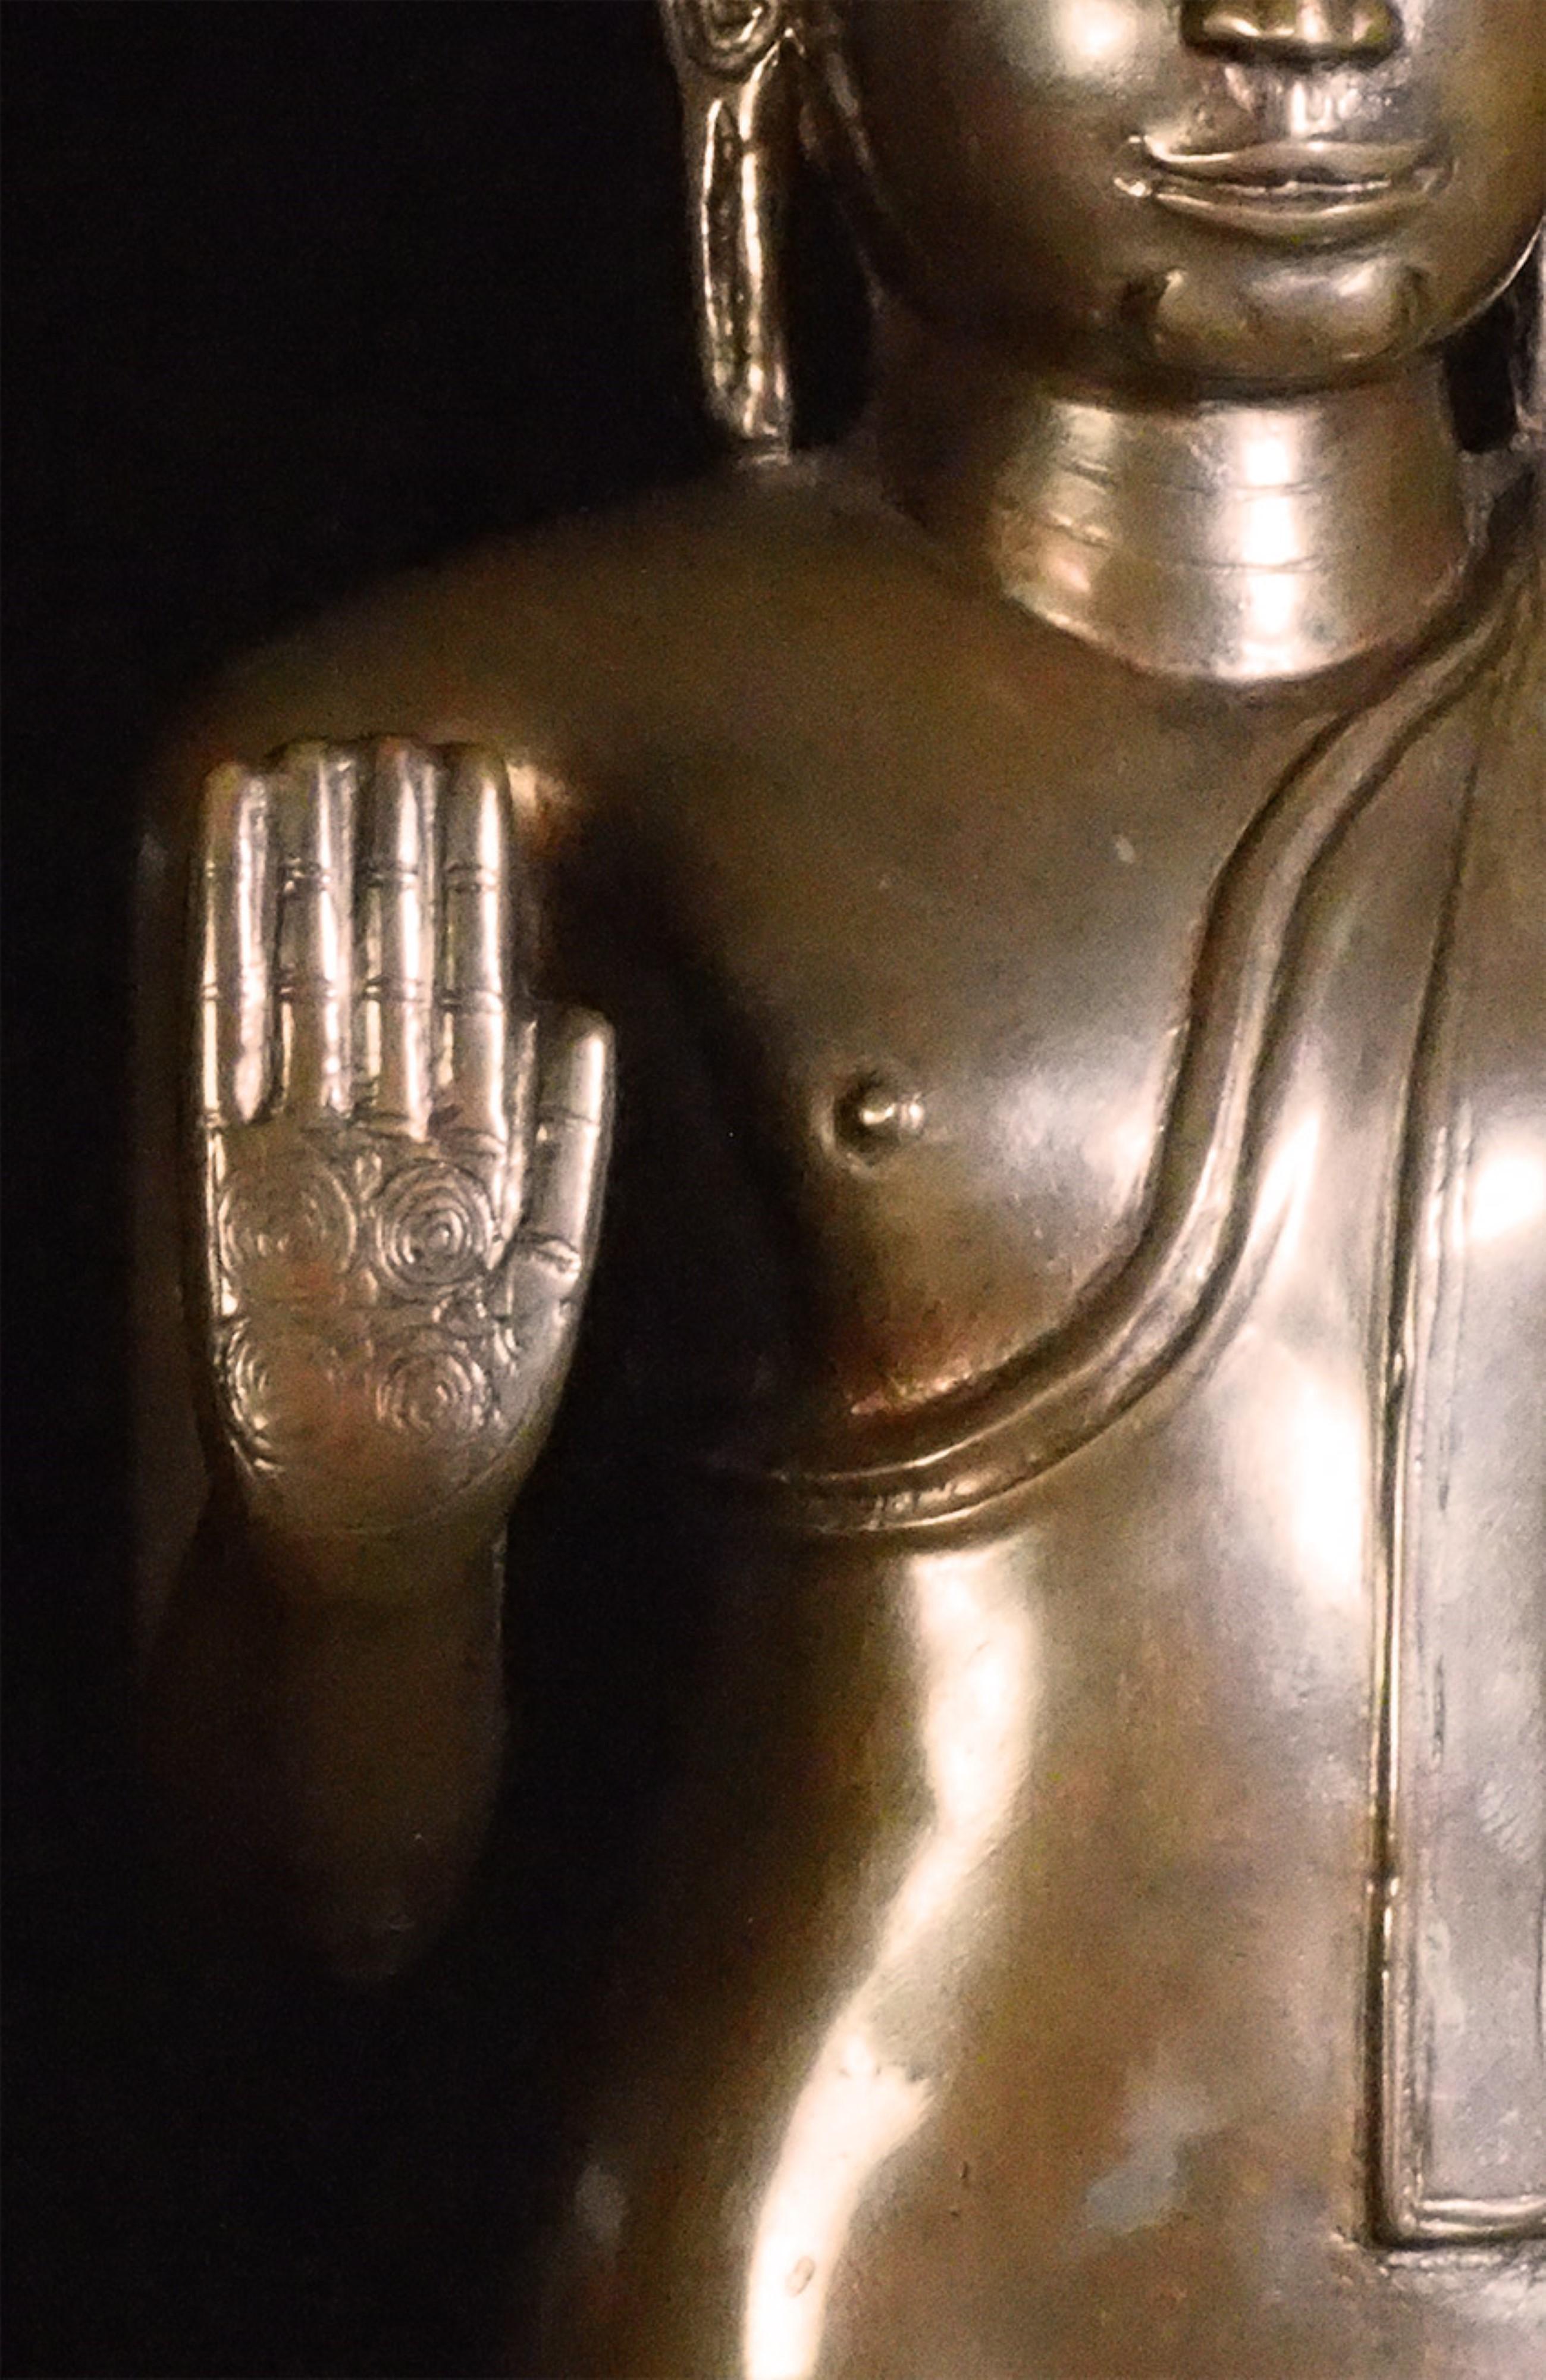 15thC Sri Lankan Divided Kingdom Period Standing Bronze Buddha. Looks to have a high silver content in the alloy based on the sheen of the surface and the softness of the surface. Quite rare to find a figure from this period in this large size and